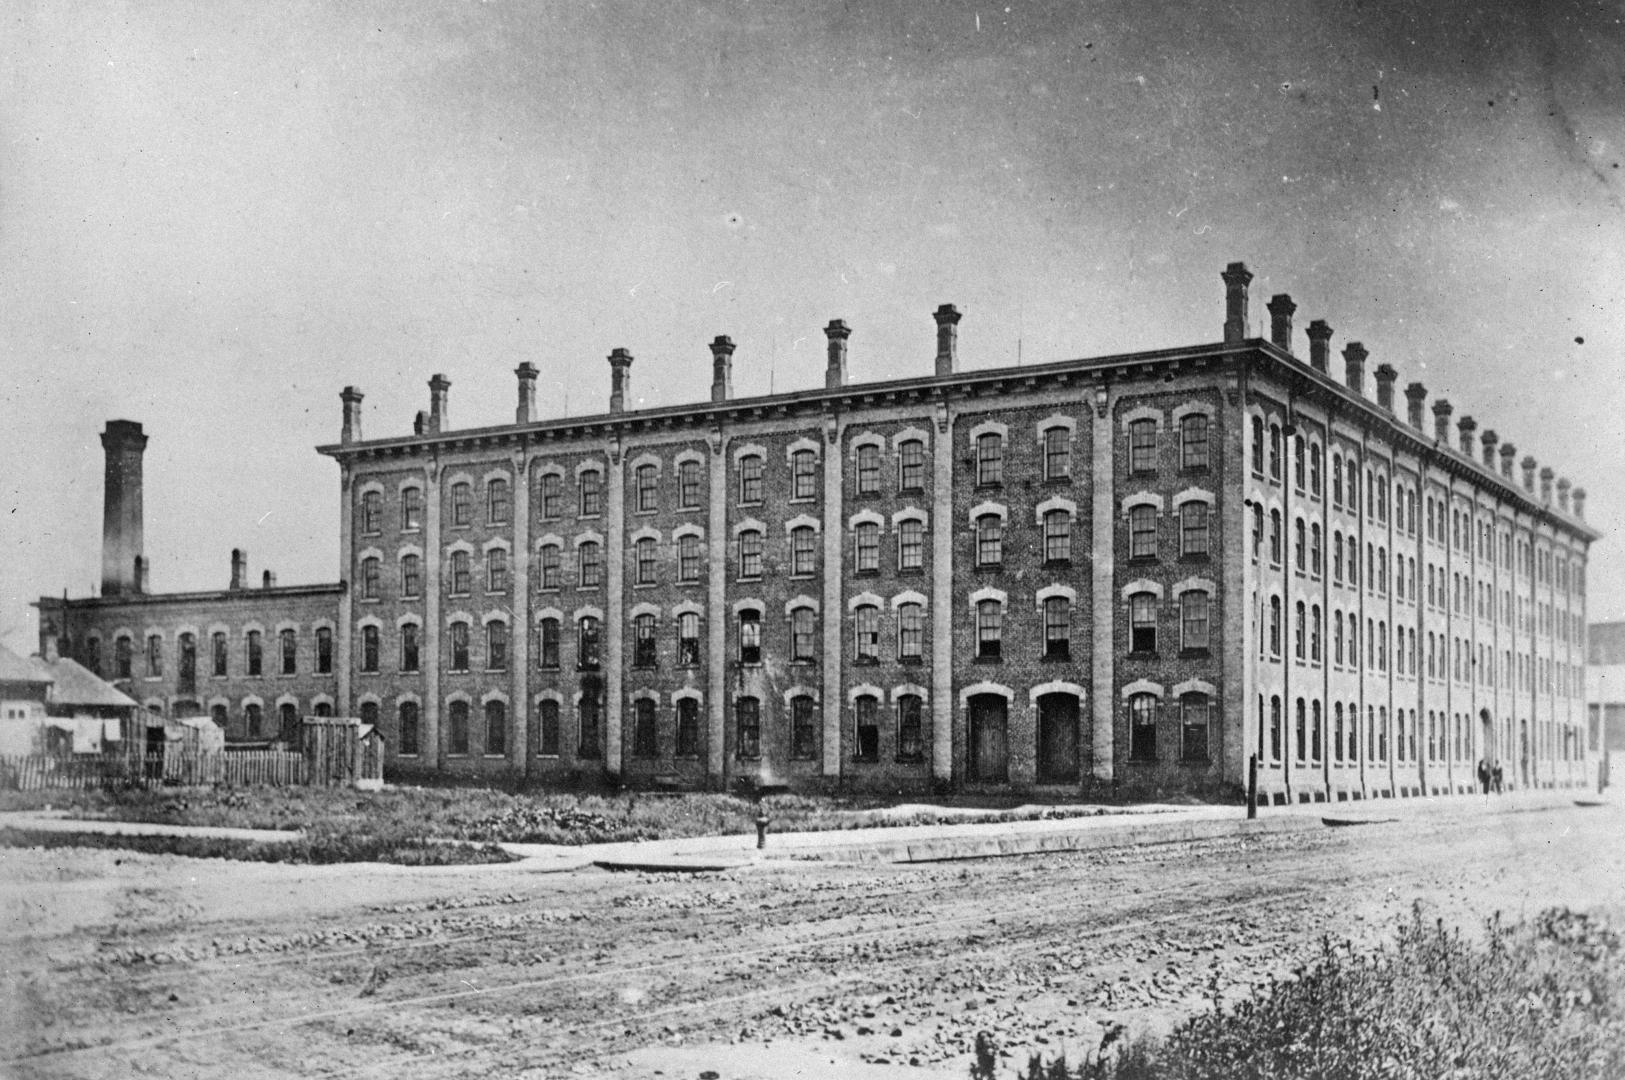 Gurney (E. & C.) Stove Manufacturers, factory, King Street West, north side, between Brant St. & Spadina Avenue